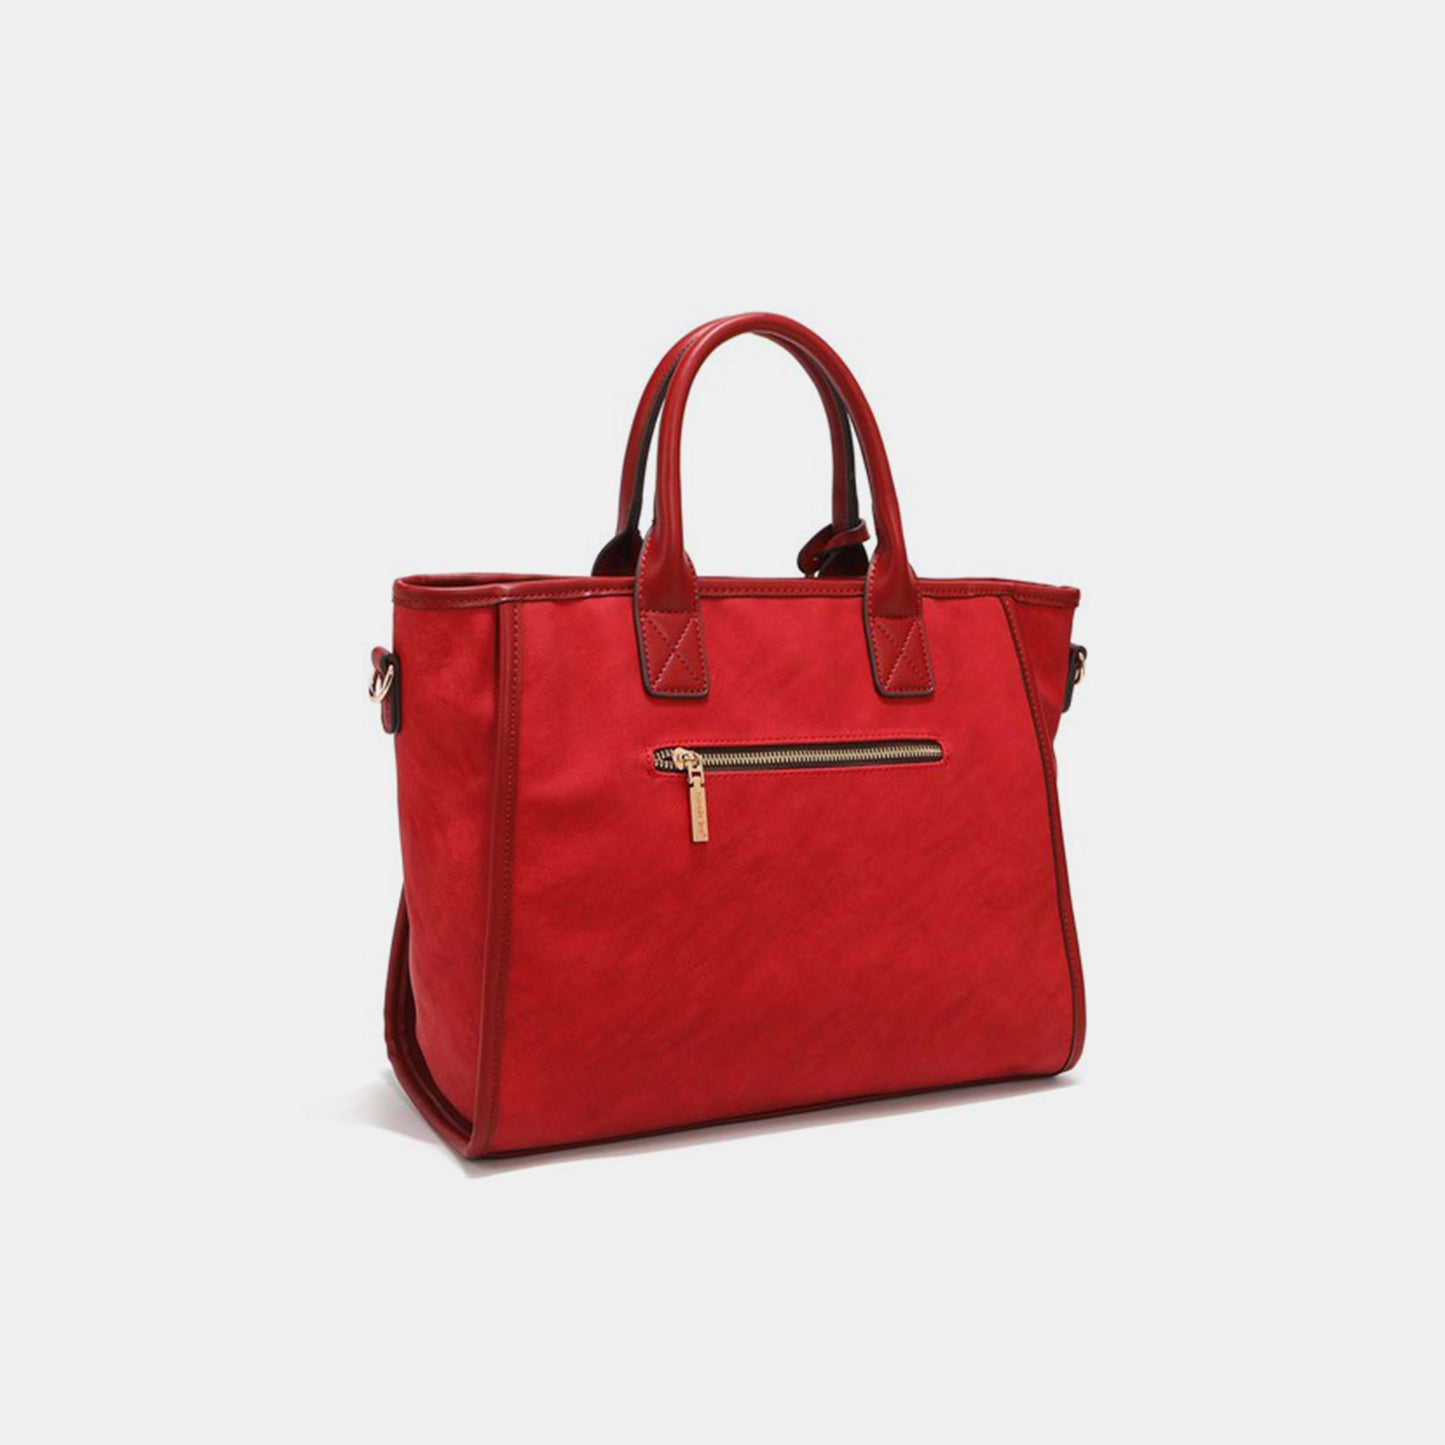 Introducing the Nicole Lee USA Scallop Stitched Handbag by Marianela's Exclusive Shop, LLC. This vibrant red vegan leather tote features dual handles with black edging and a detachable shoulder strap. The elegant accessory includes a front zippered pocket with a gold zipper and boasts a sleek, structured design, exquisitely showcased against a white background.